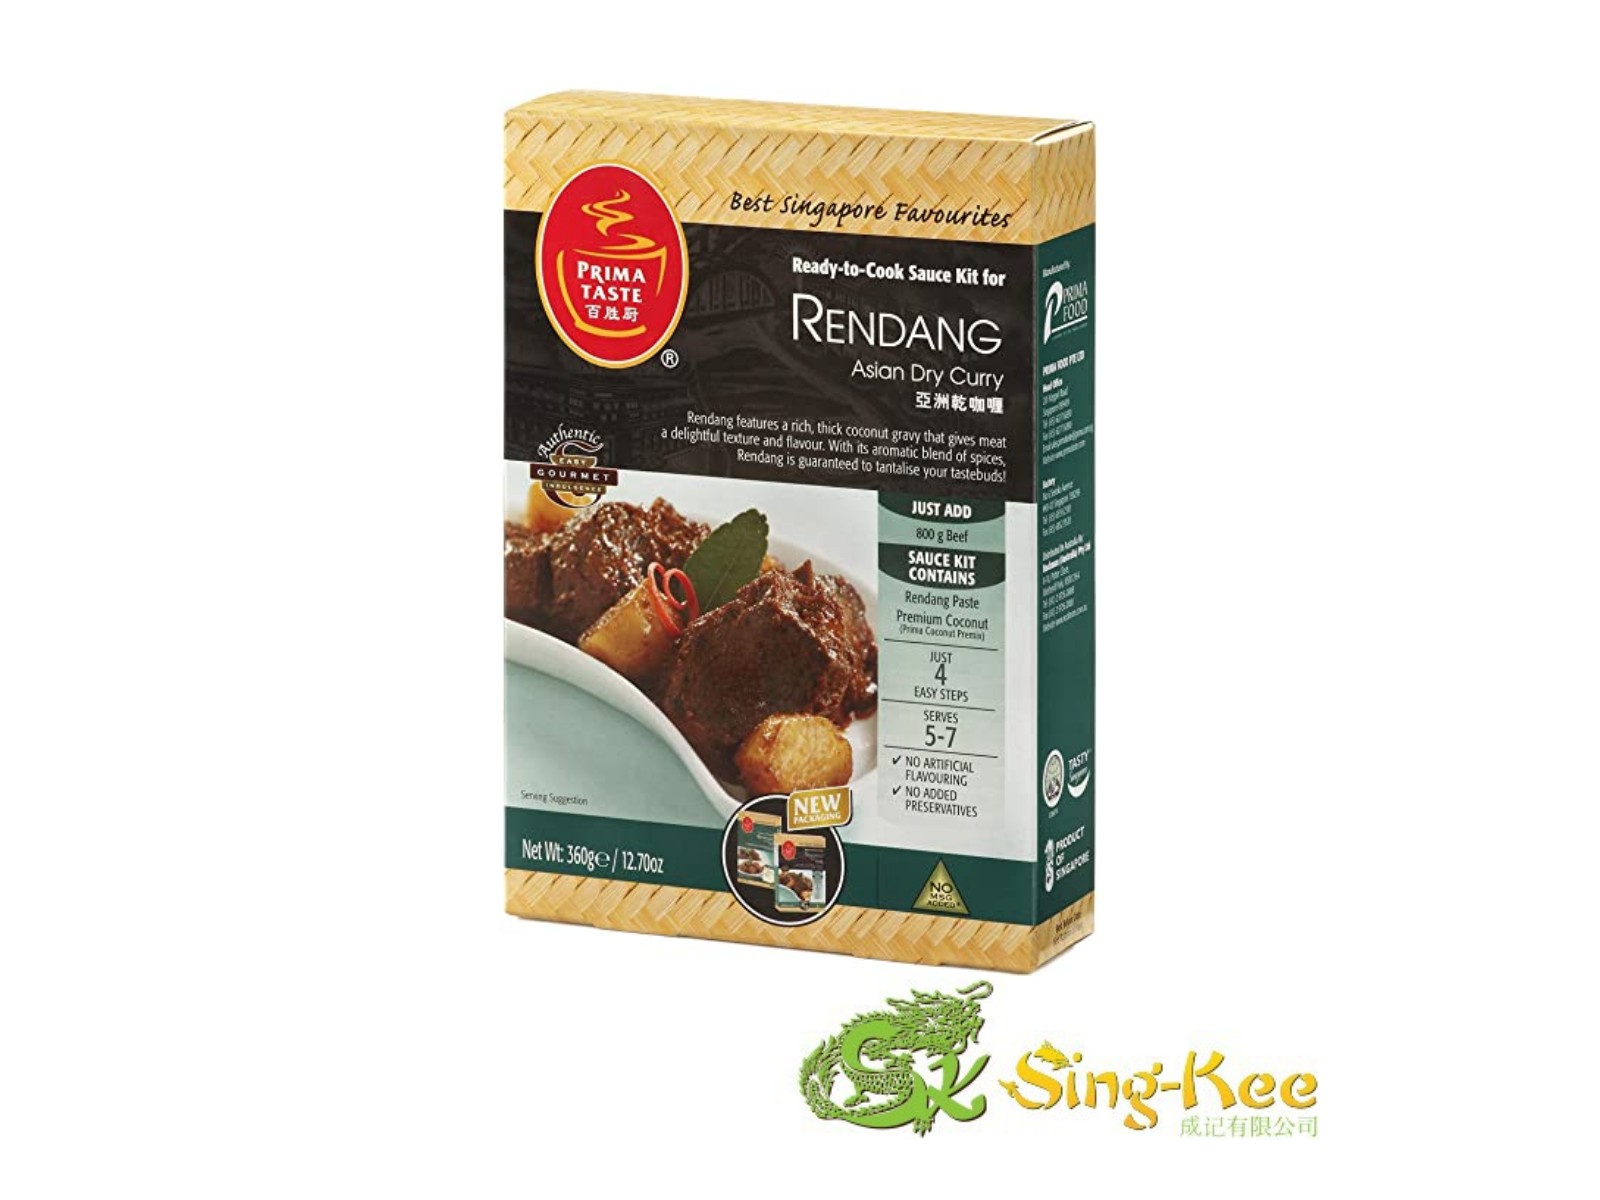 PRIMA TASTE RENDANG CURRY KIT 360G ASIAN DRY CURRY - Herbs, spices ...